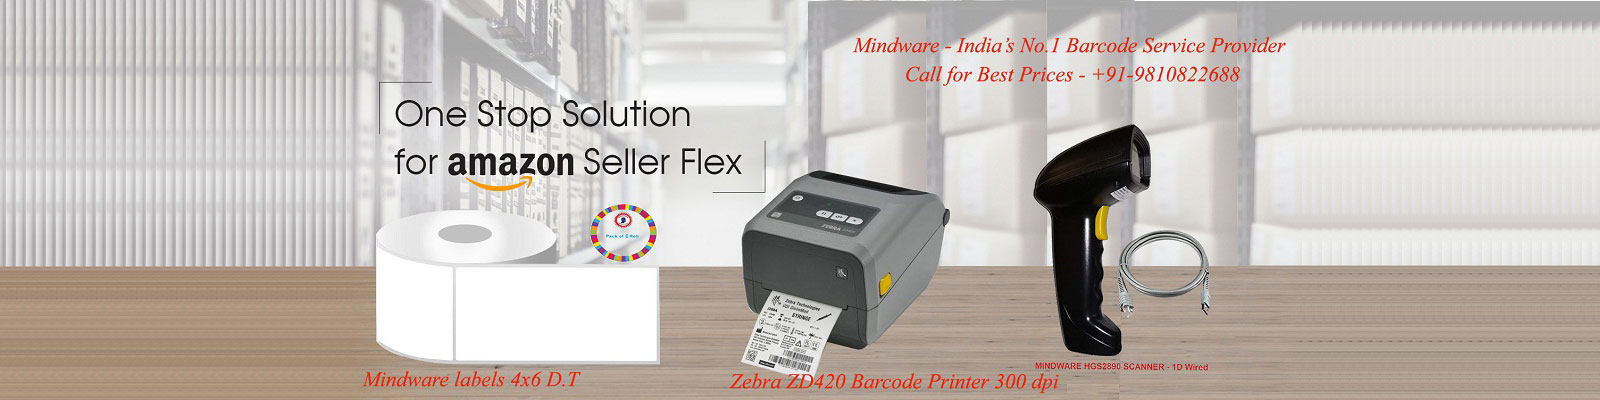 One Stop Solution for Amazon Seller Flex, Call - +91-9810822688